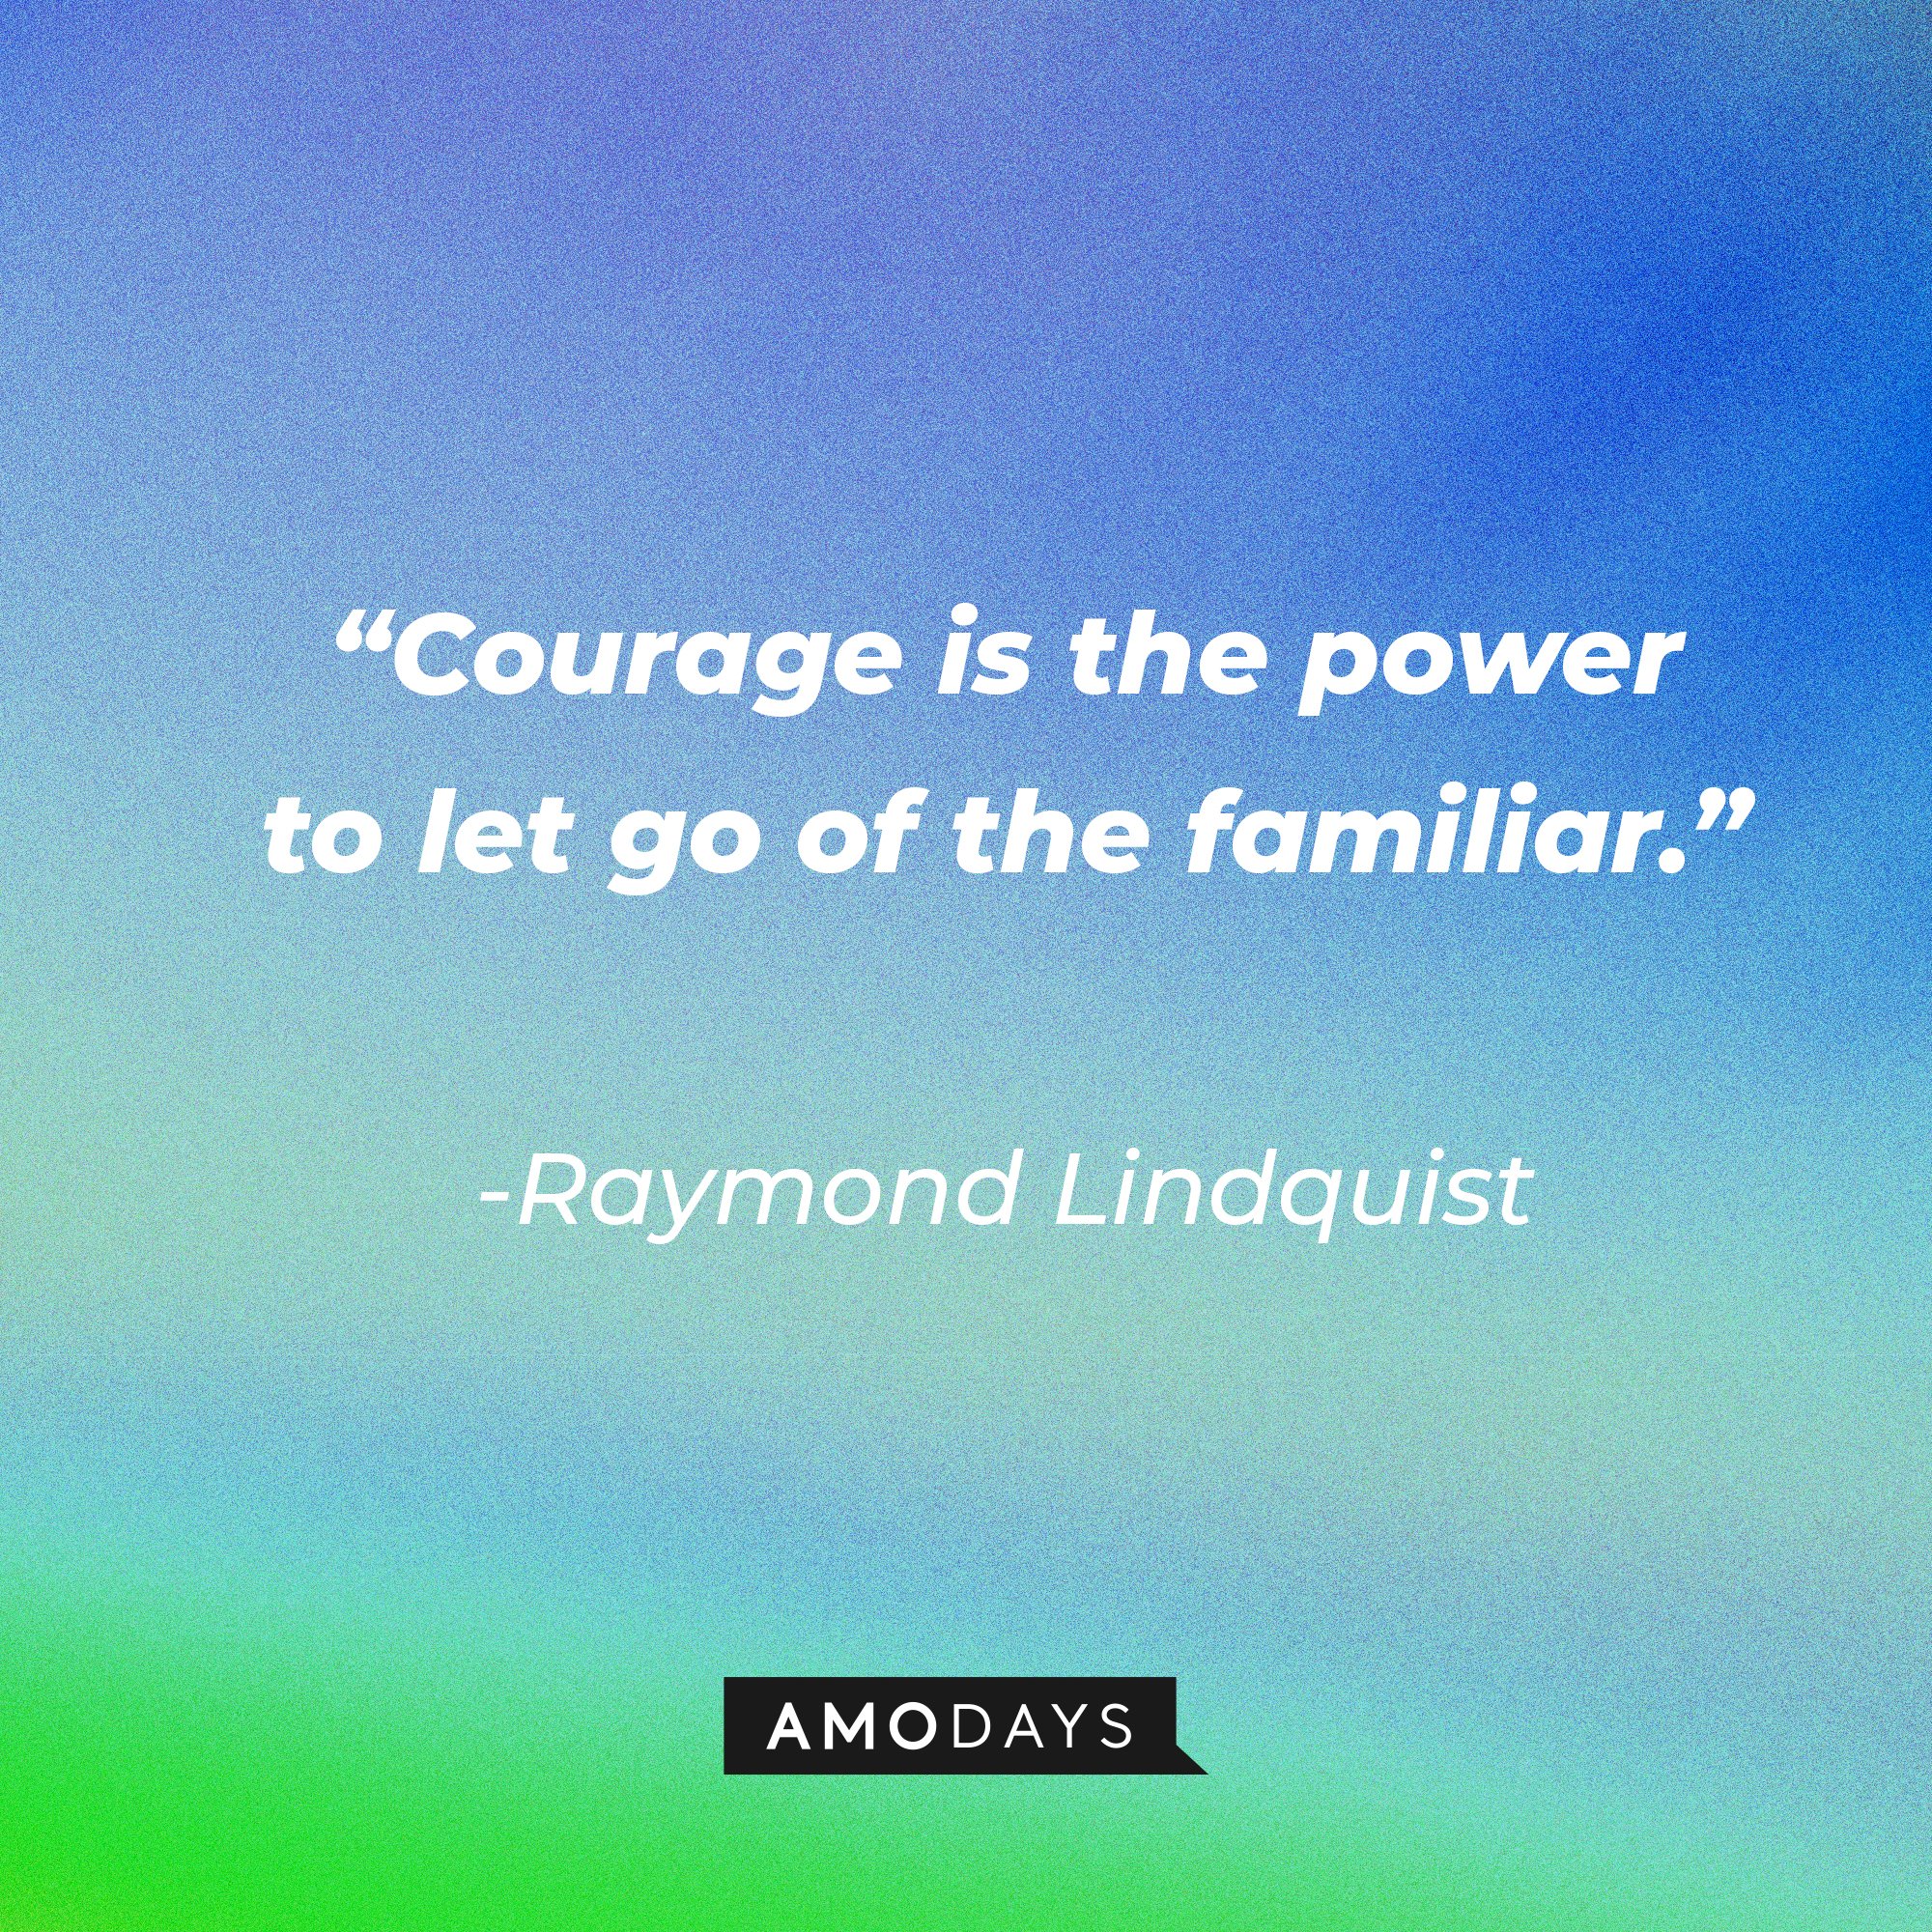 Raymond Lindquist's quote: “Courage is the power to let go of the familiar.” | Image: AmoDays